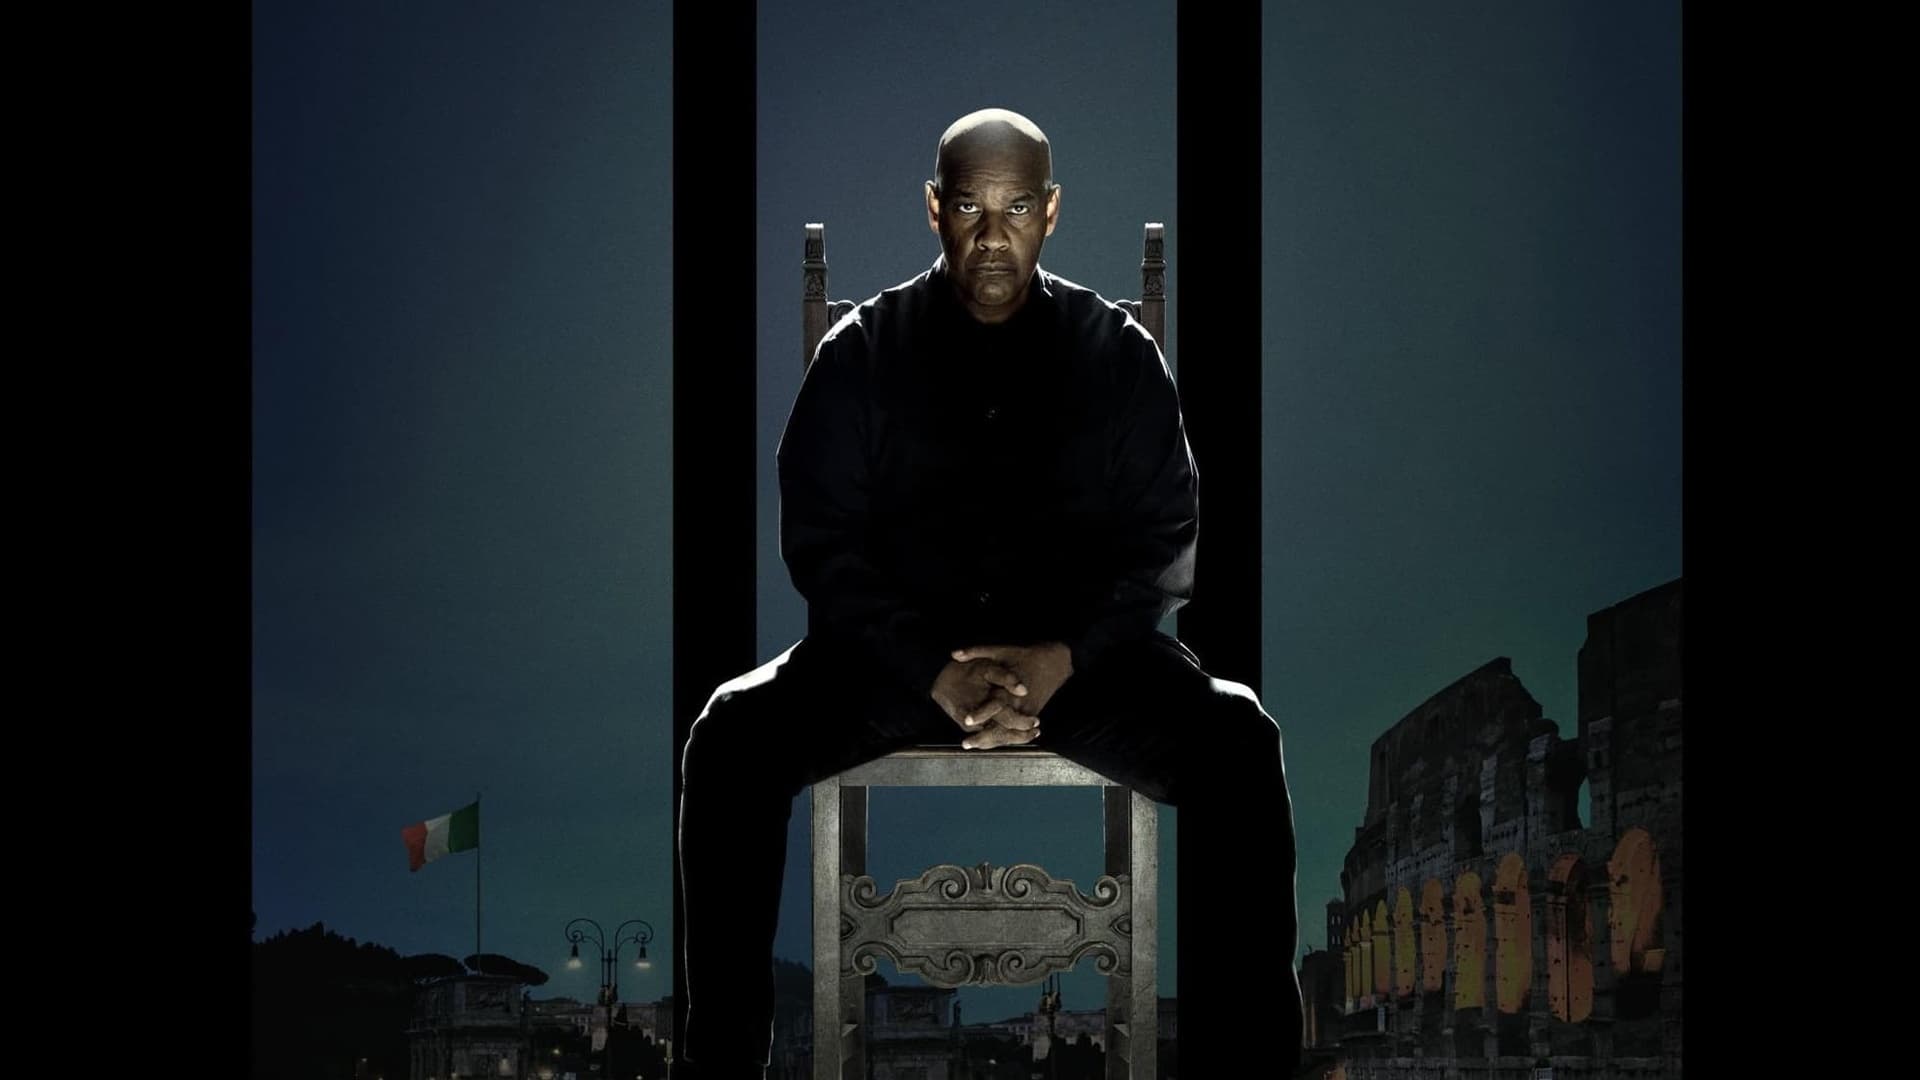 Backgrounds and walpapers The Equalizer 3